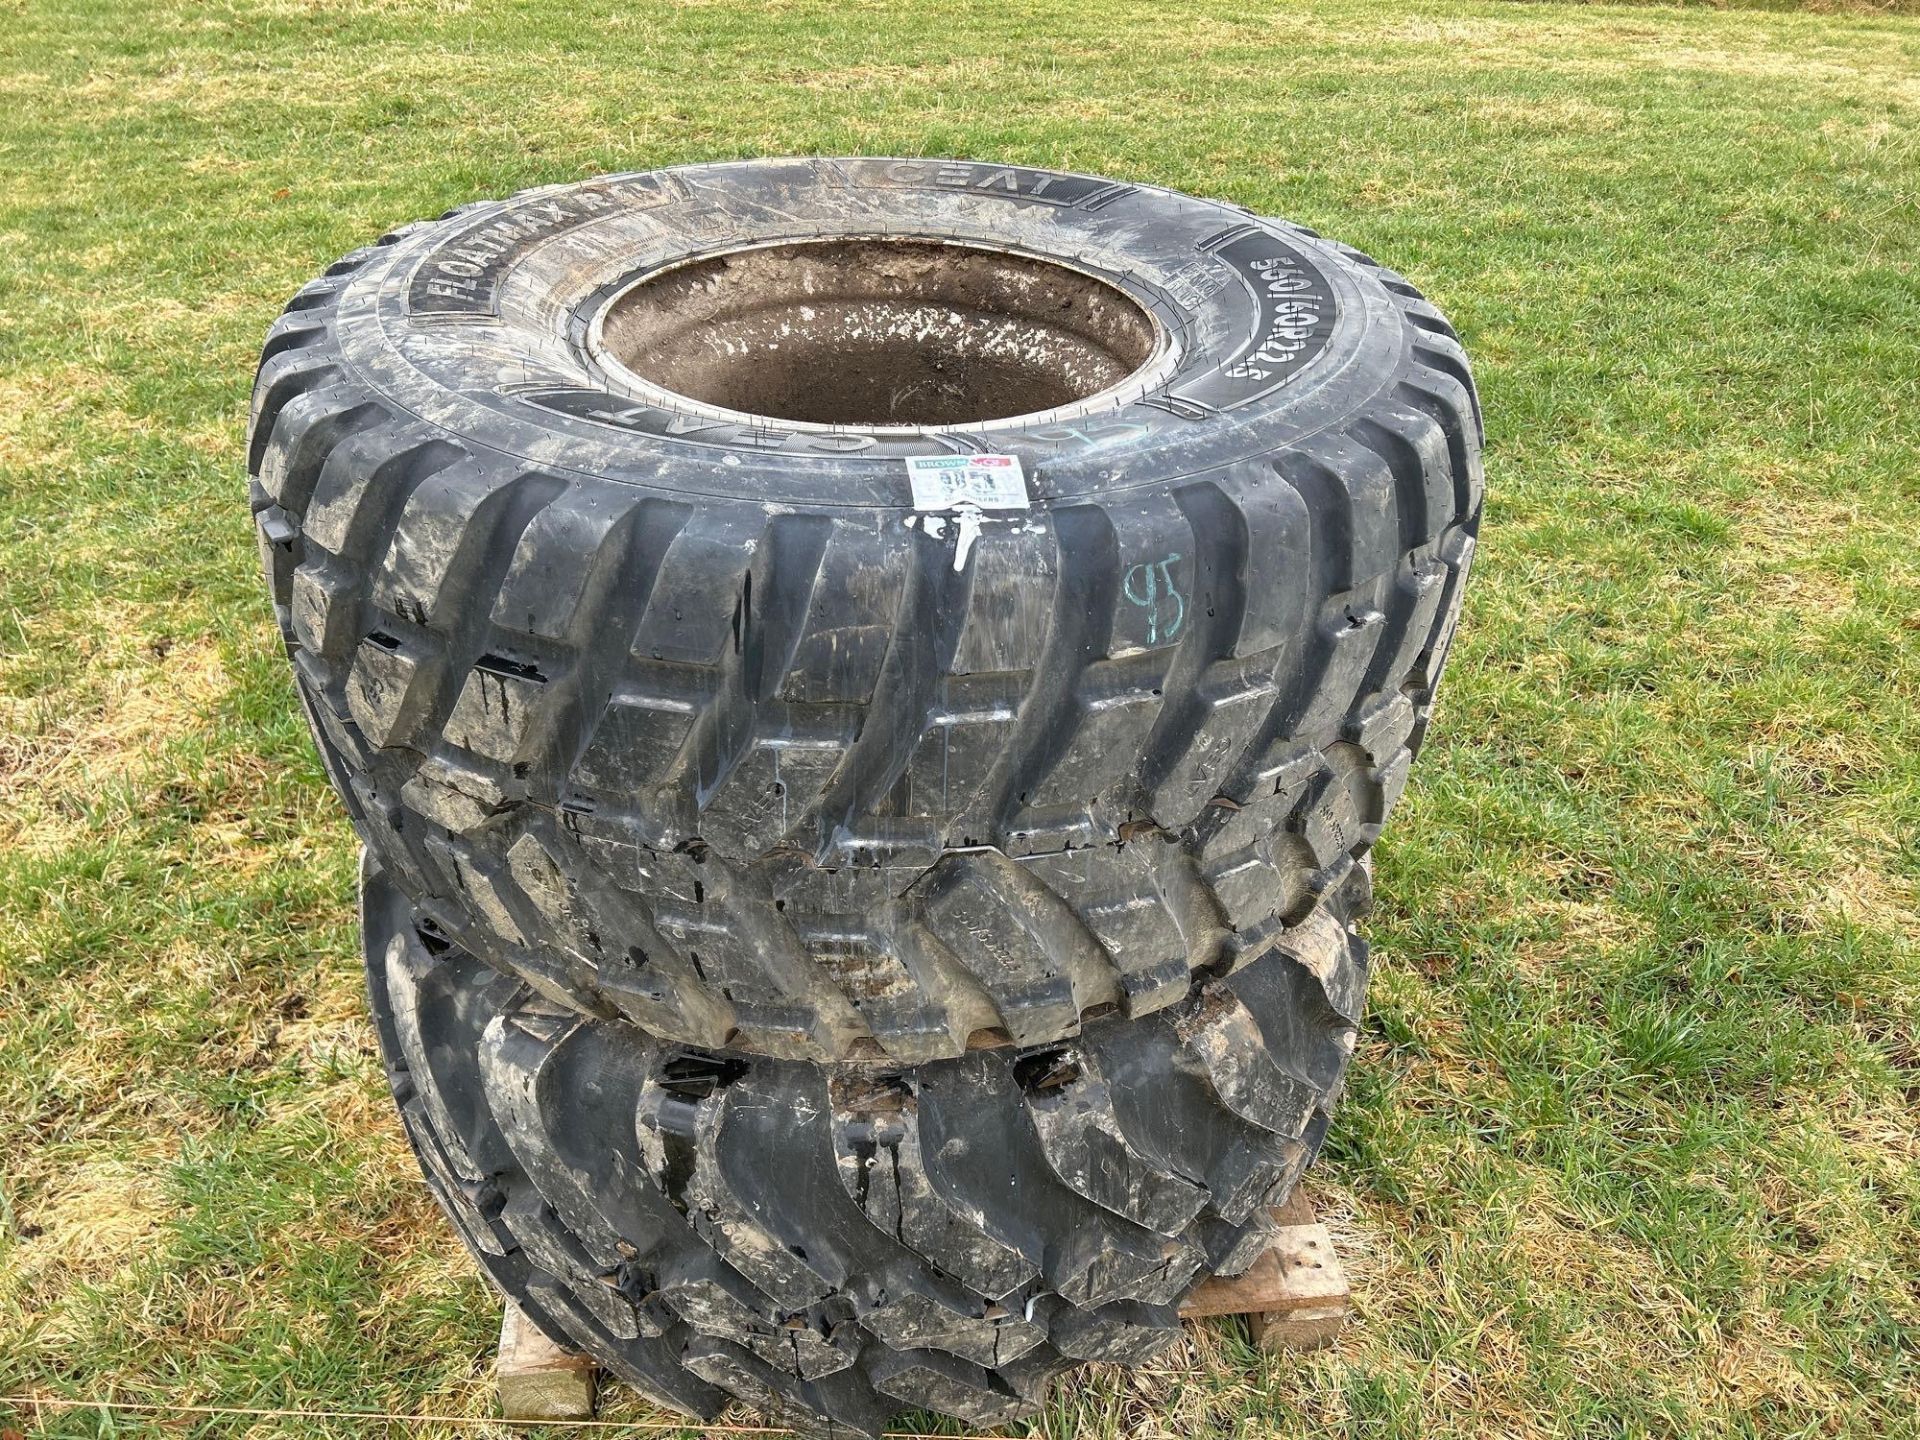 Pair of 560/60R22.5 floatation tyres and wheels. Brand new.